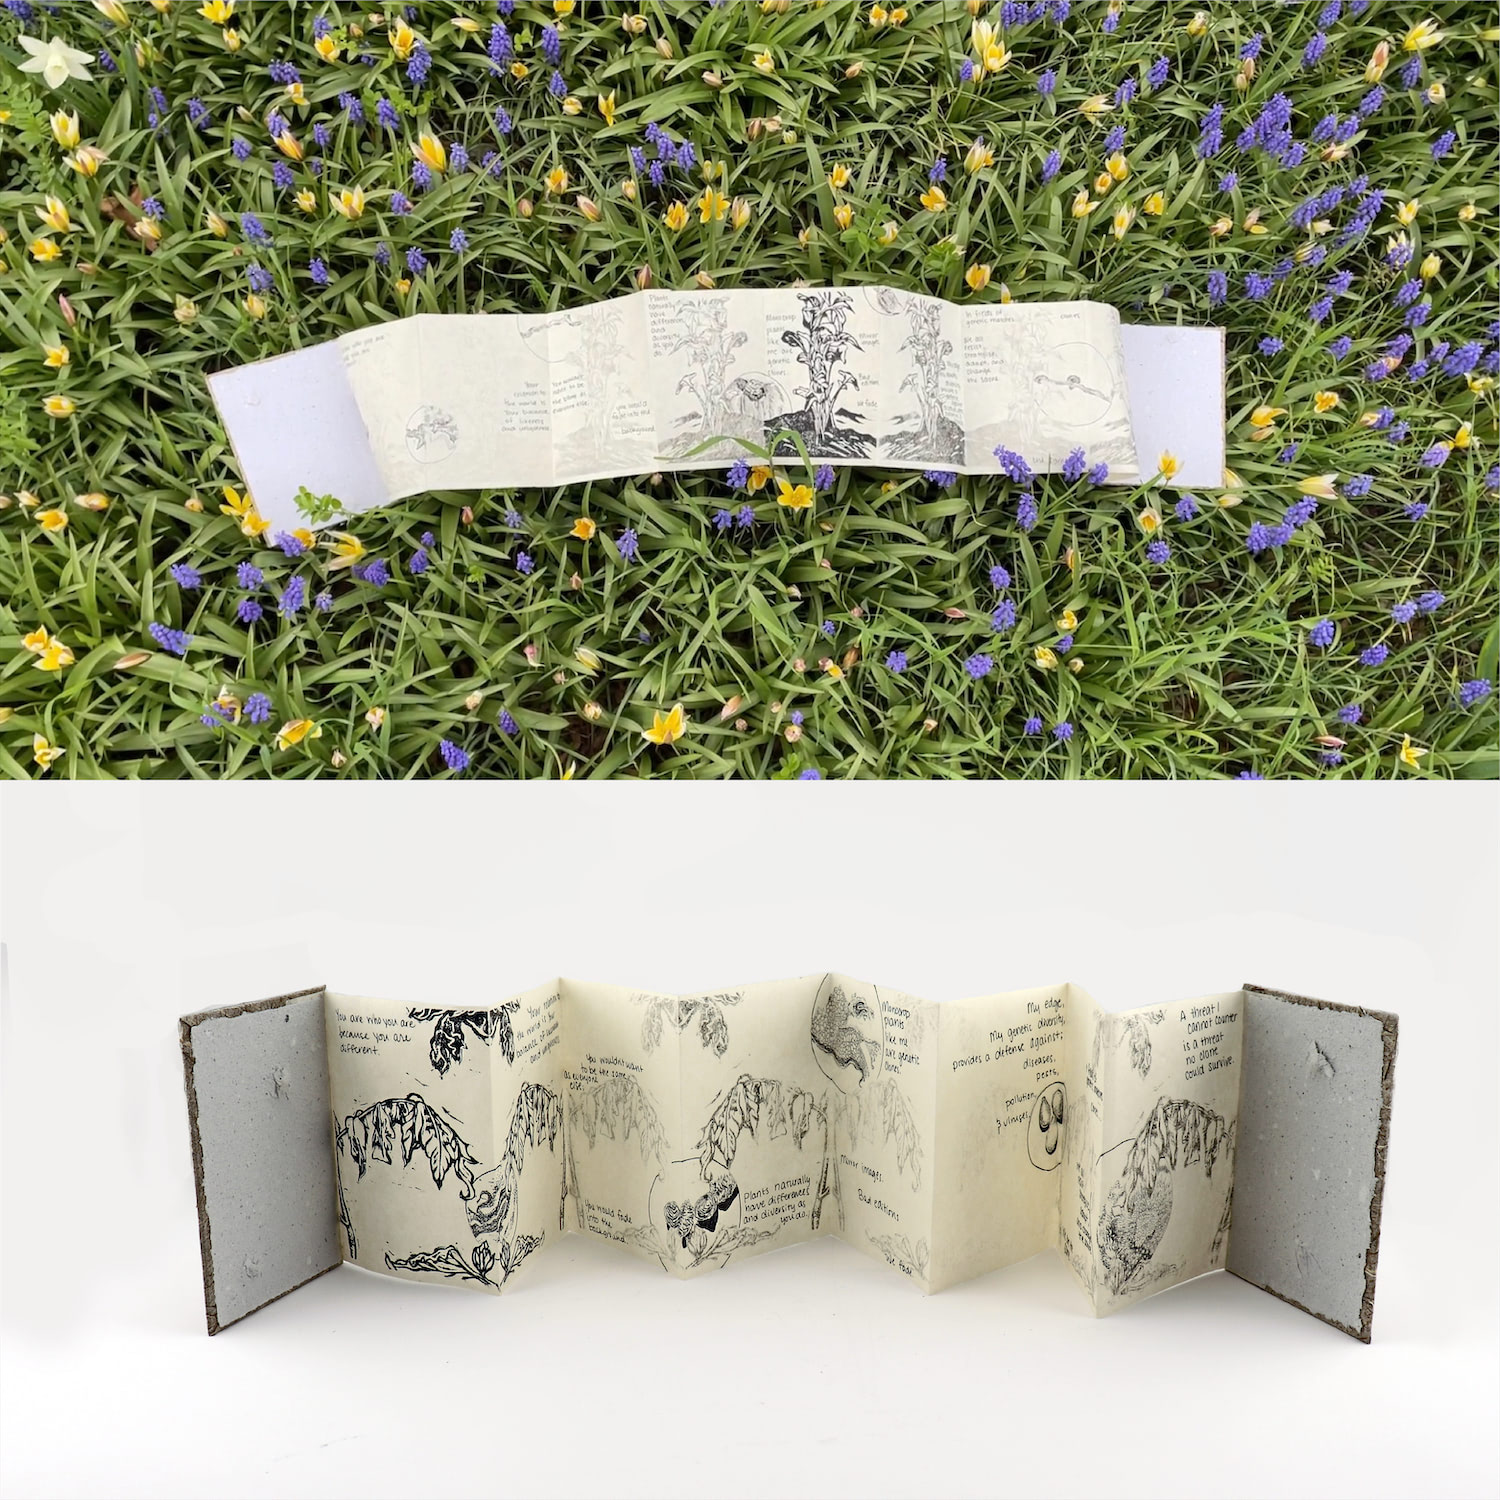 Top image shows the book in a flowery spring garden, and the bottom shows the book in a white studio setting.